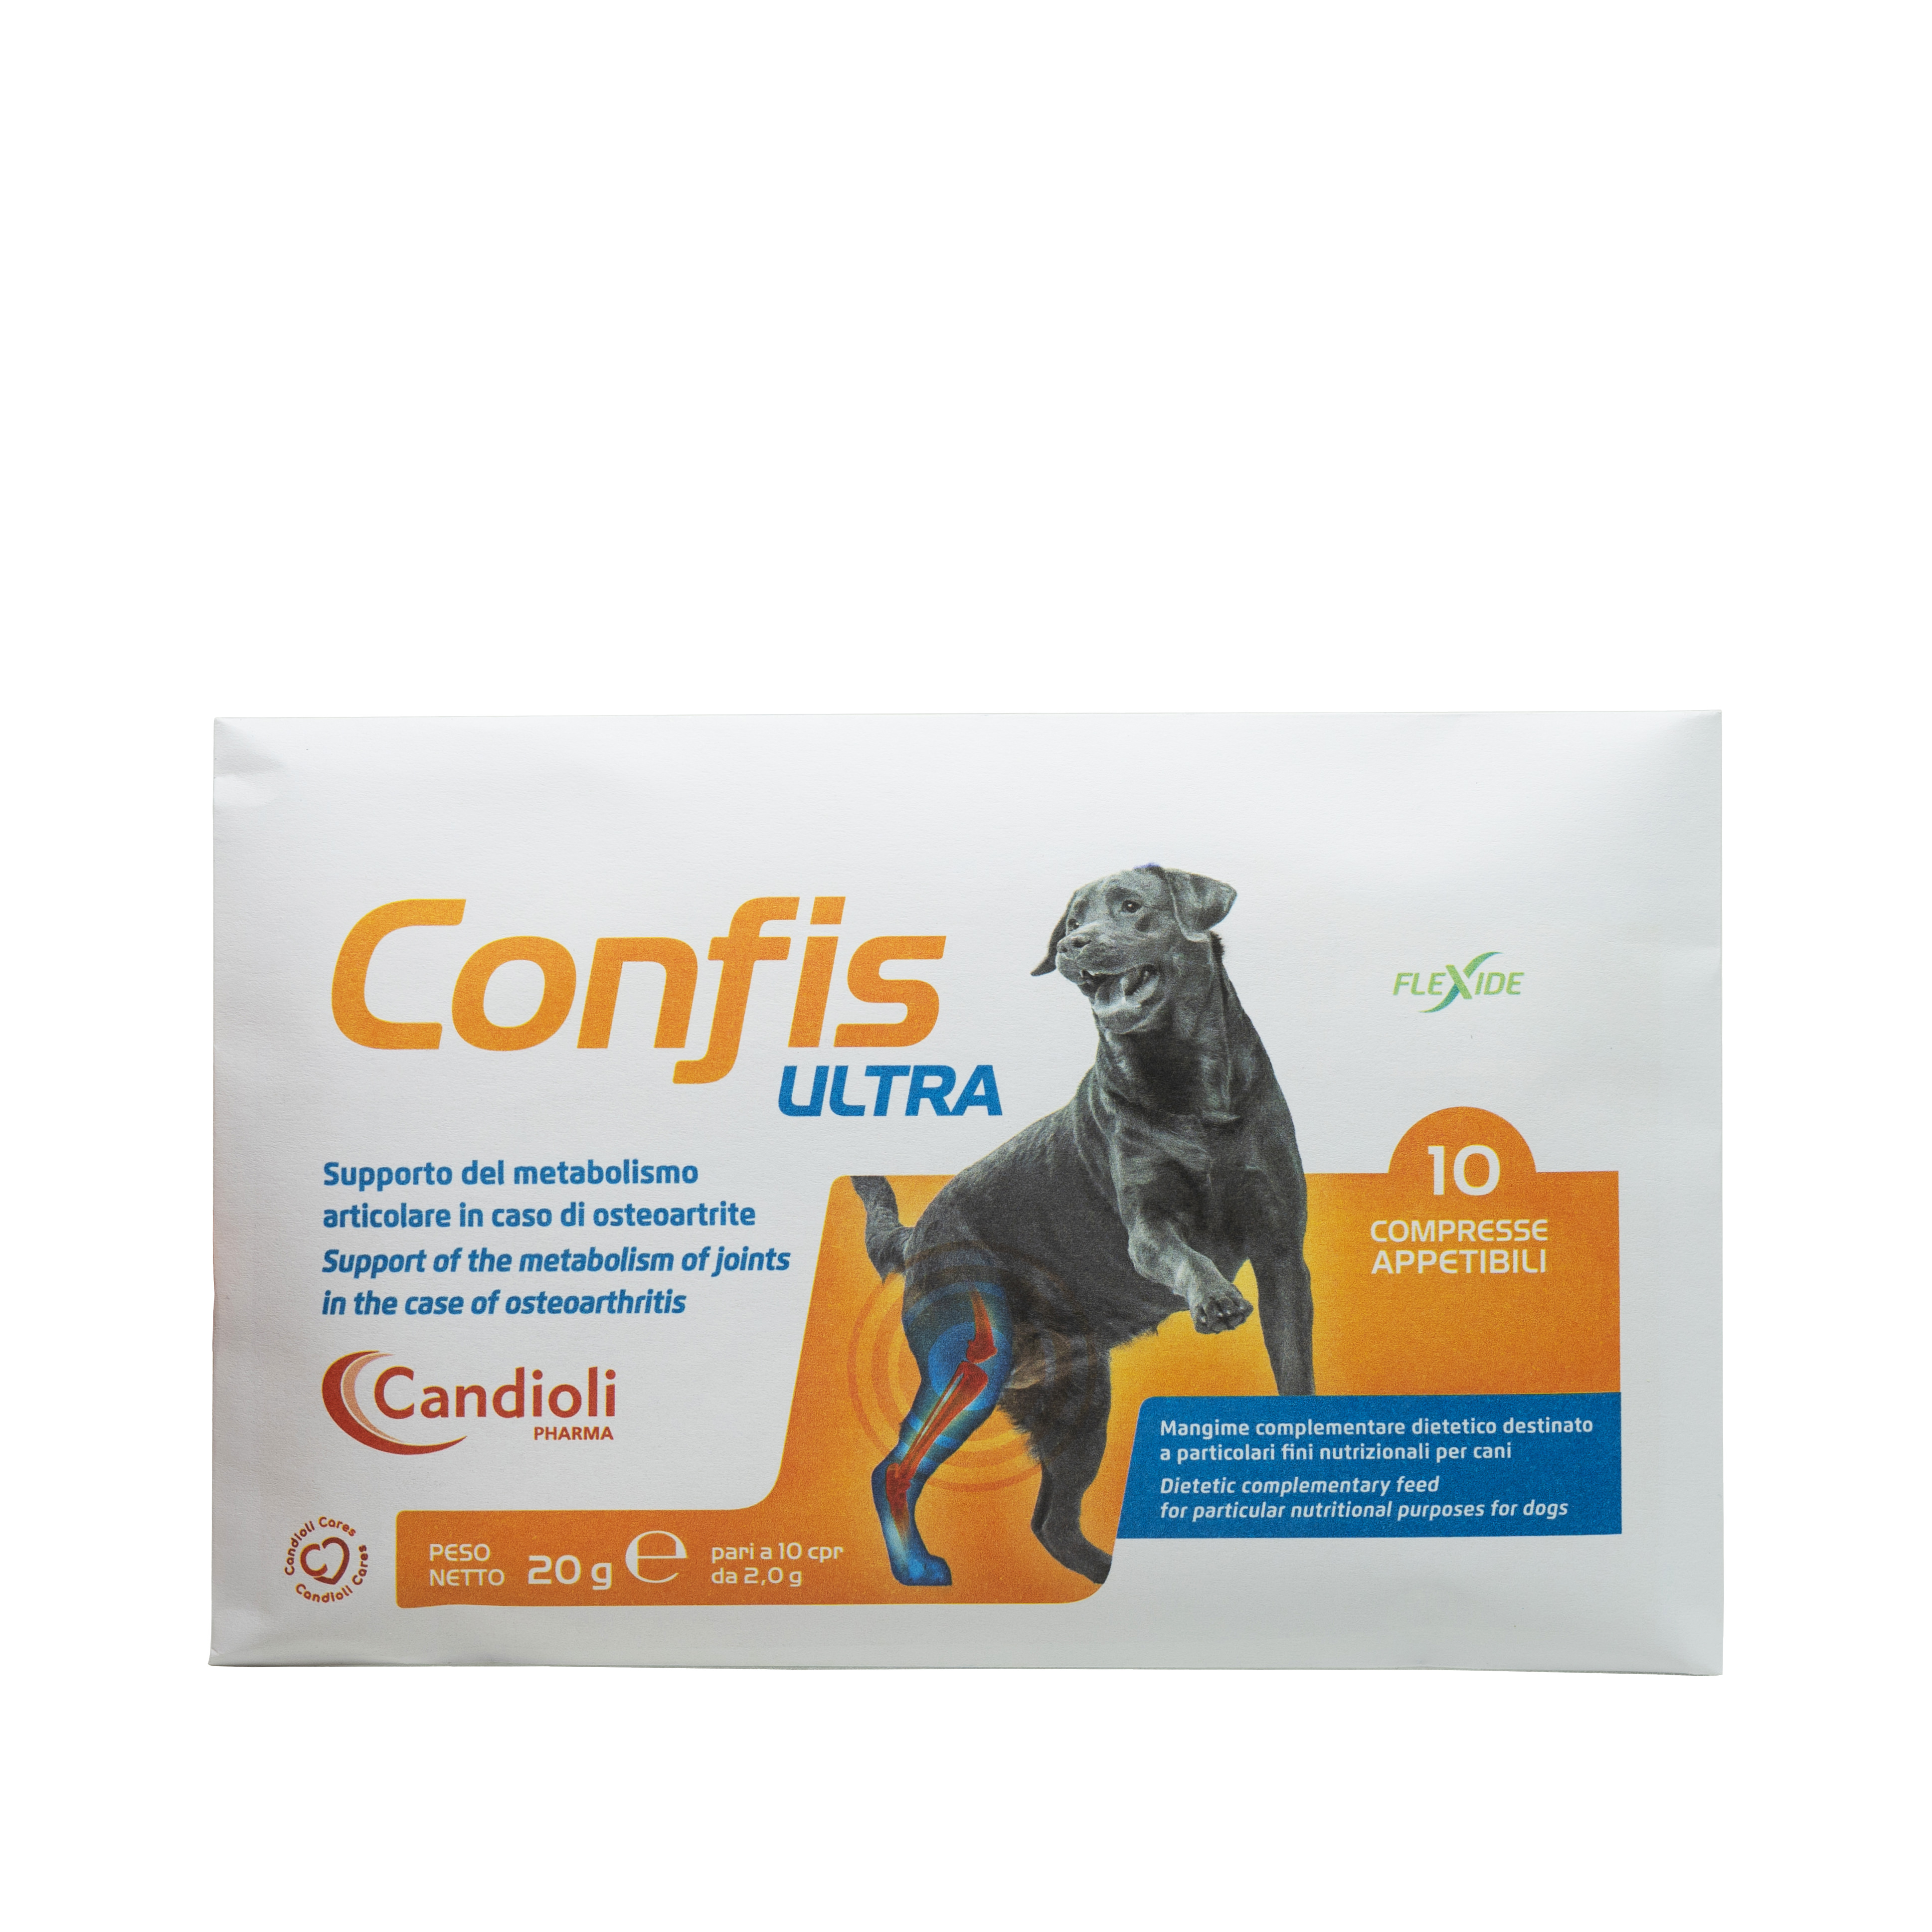 Supliment nutritiv Candioli Confis Ultra, 10 tablete/ blister thepetclub